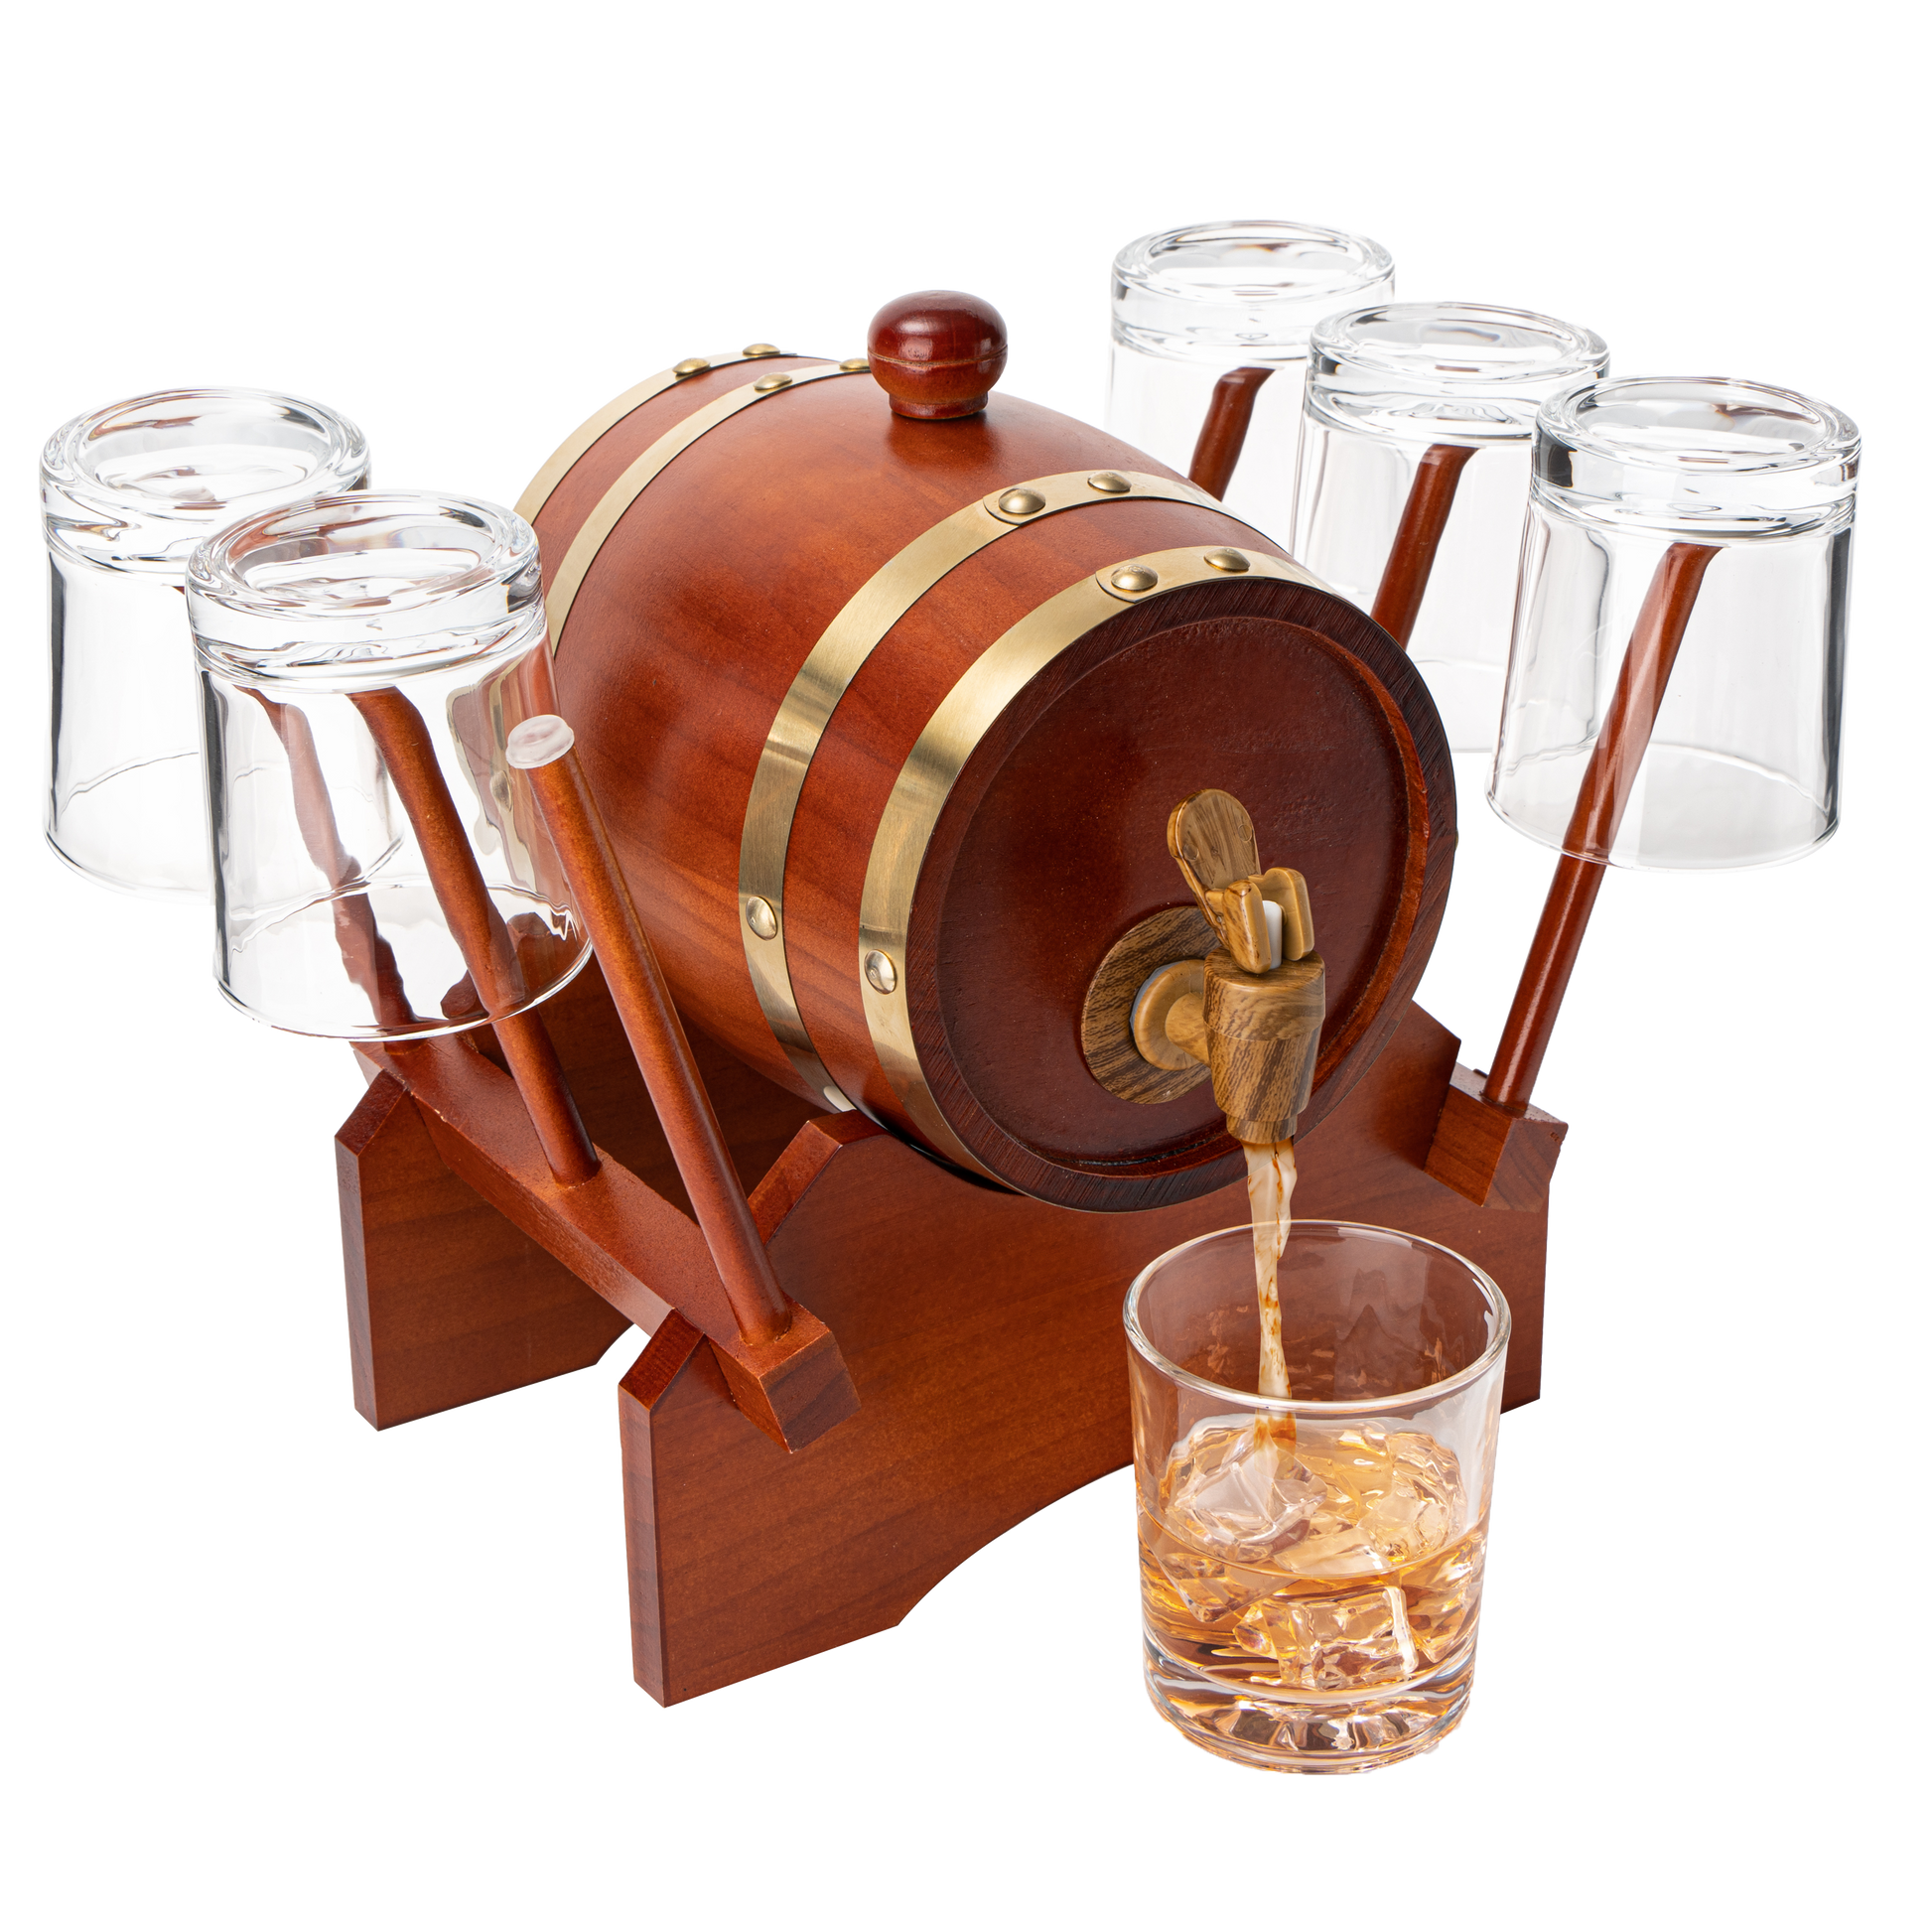 Barrel Decanter with 6 Whiskey Glasses by The Wine Savant - 1000 mL Mahogany Wood Old Fashioned Classic Whiskey Decanter Set, Gifts for Him, Father's Day, Gift Ideas-0